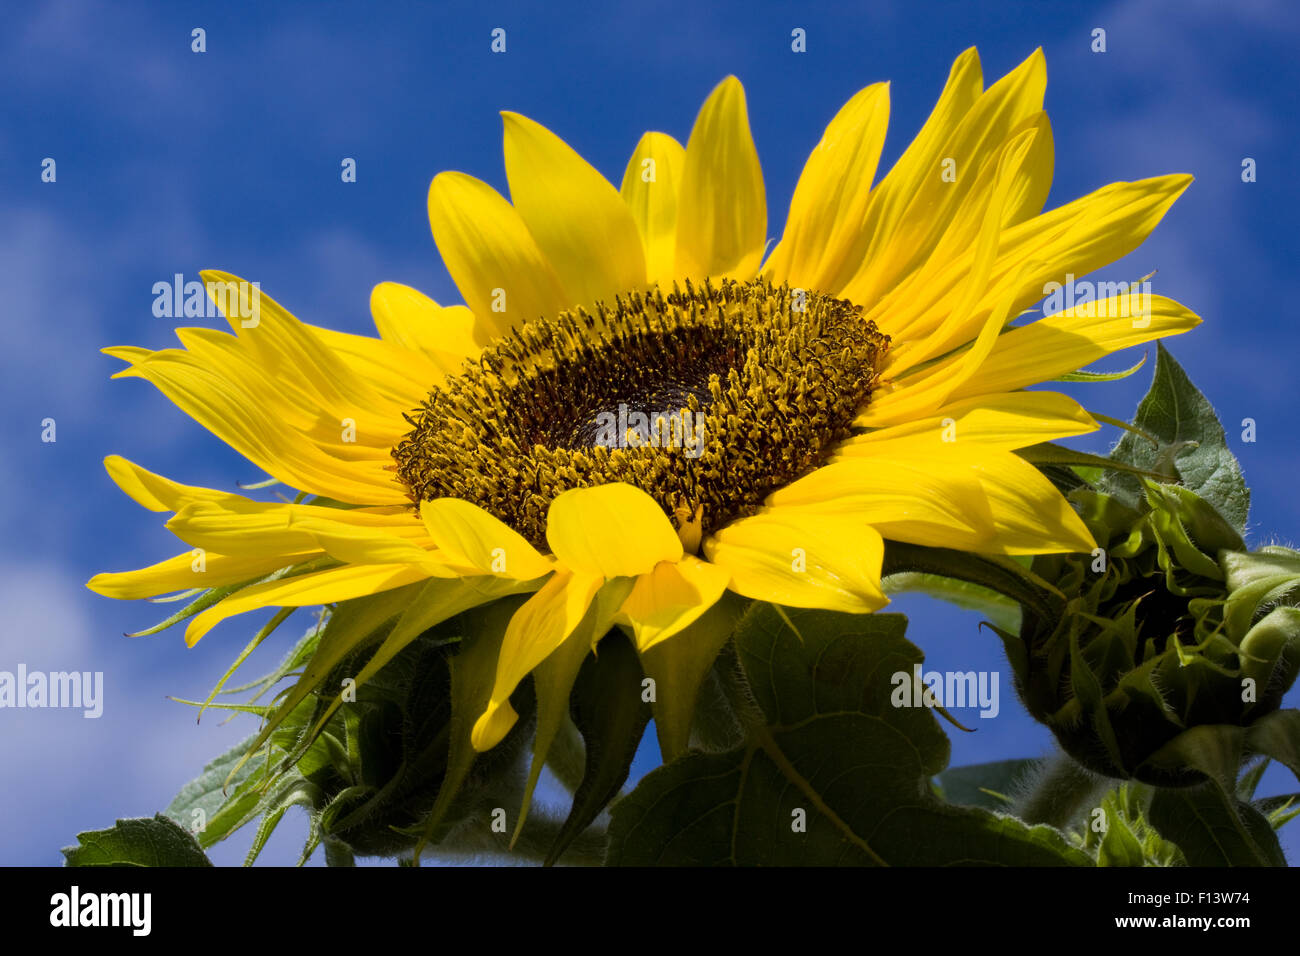 A large fully  opened sunflower, Helianthus, facing up towards a deep blue sky on a warm summer day. the flower is in full bloom facing skywards Stock Photo